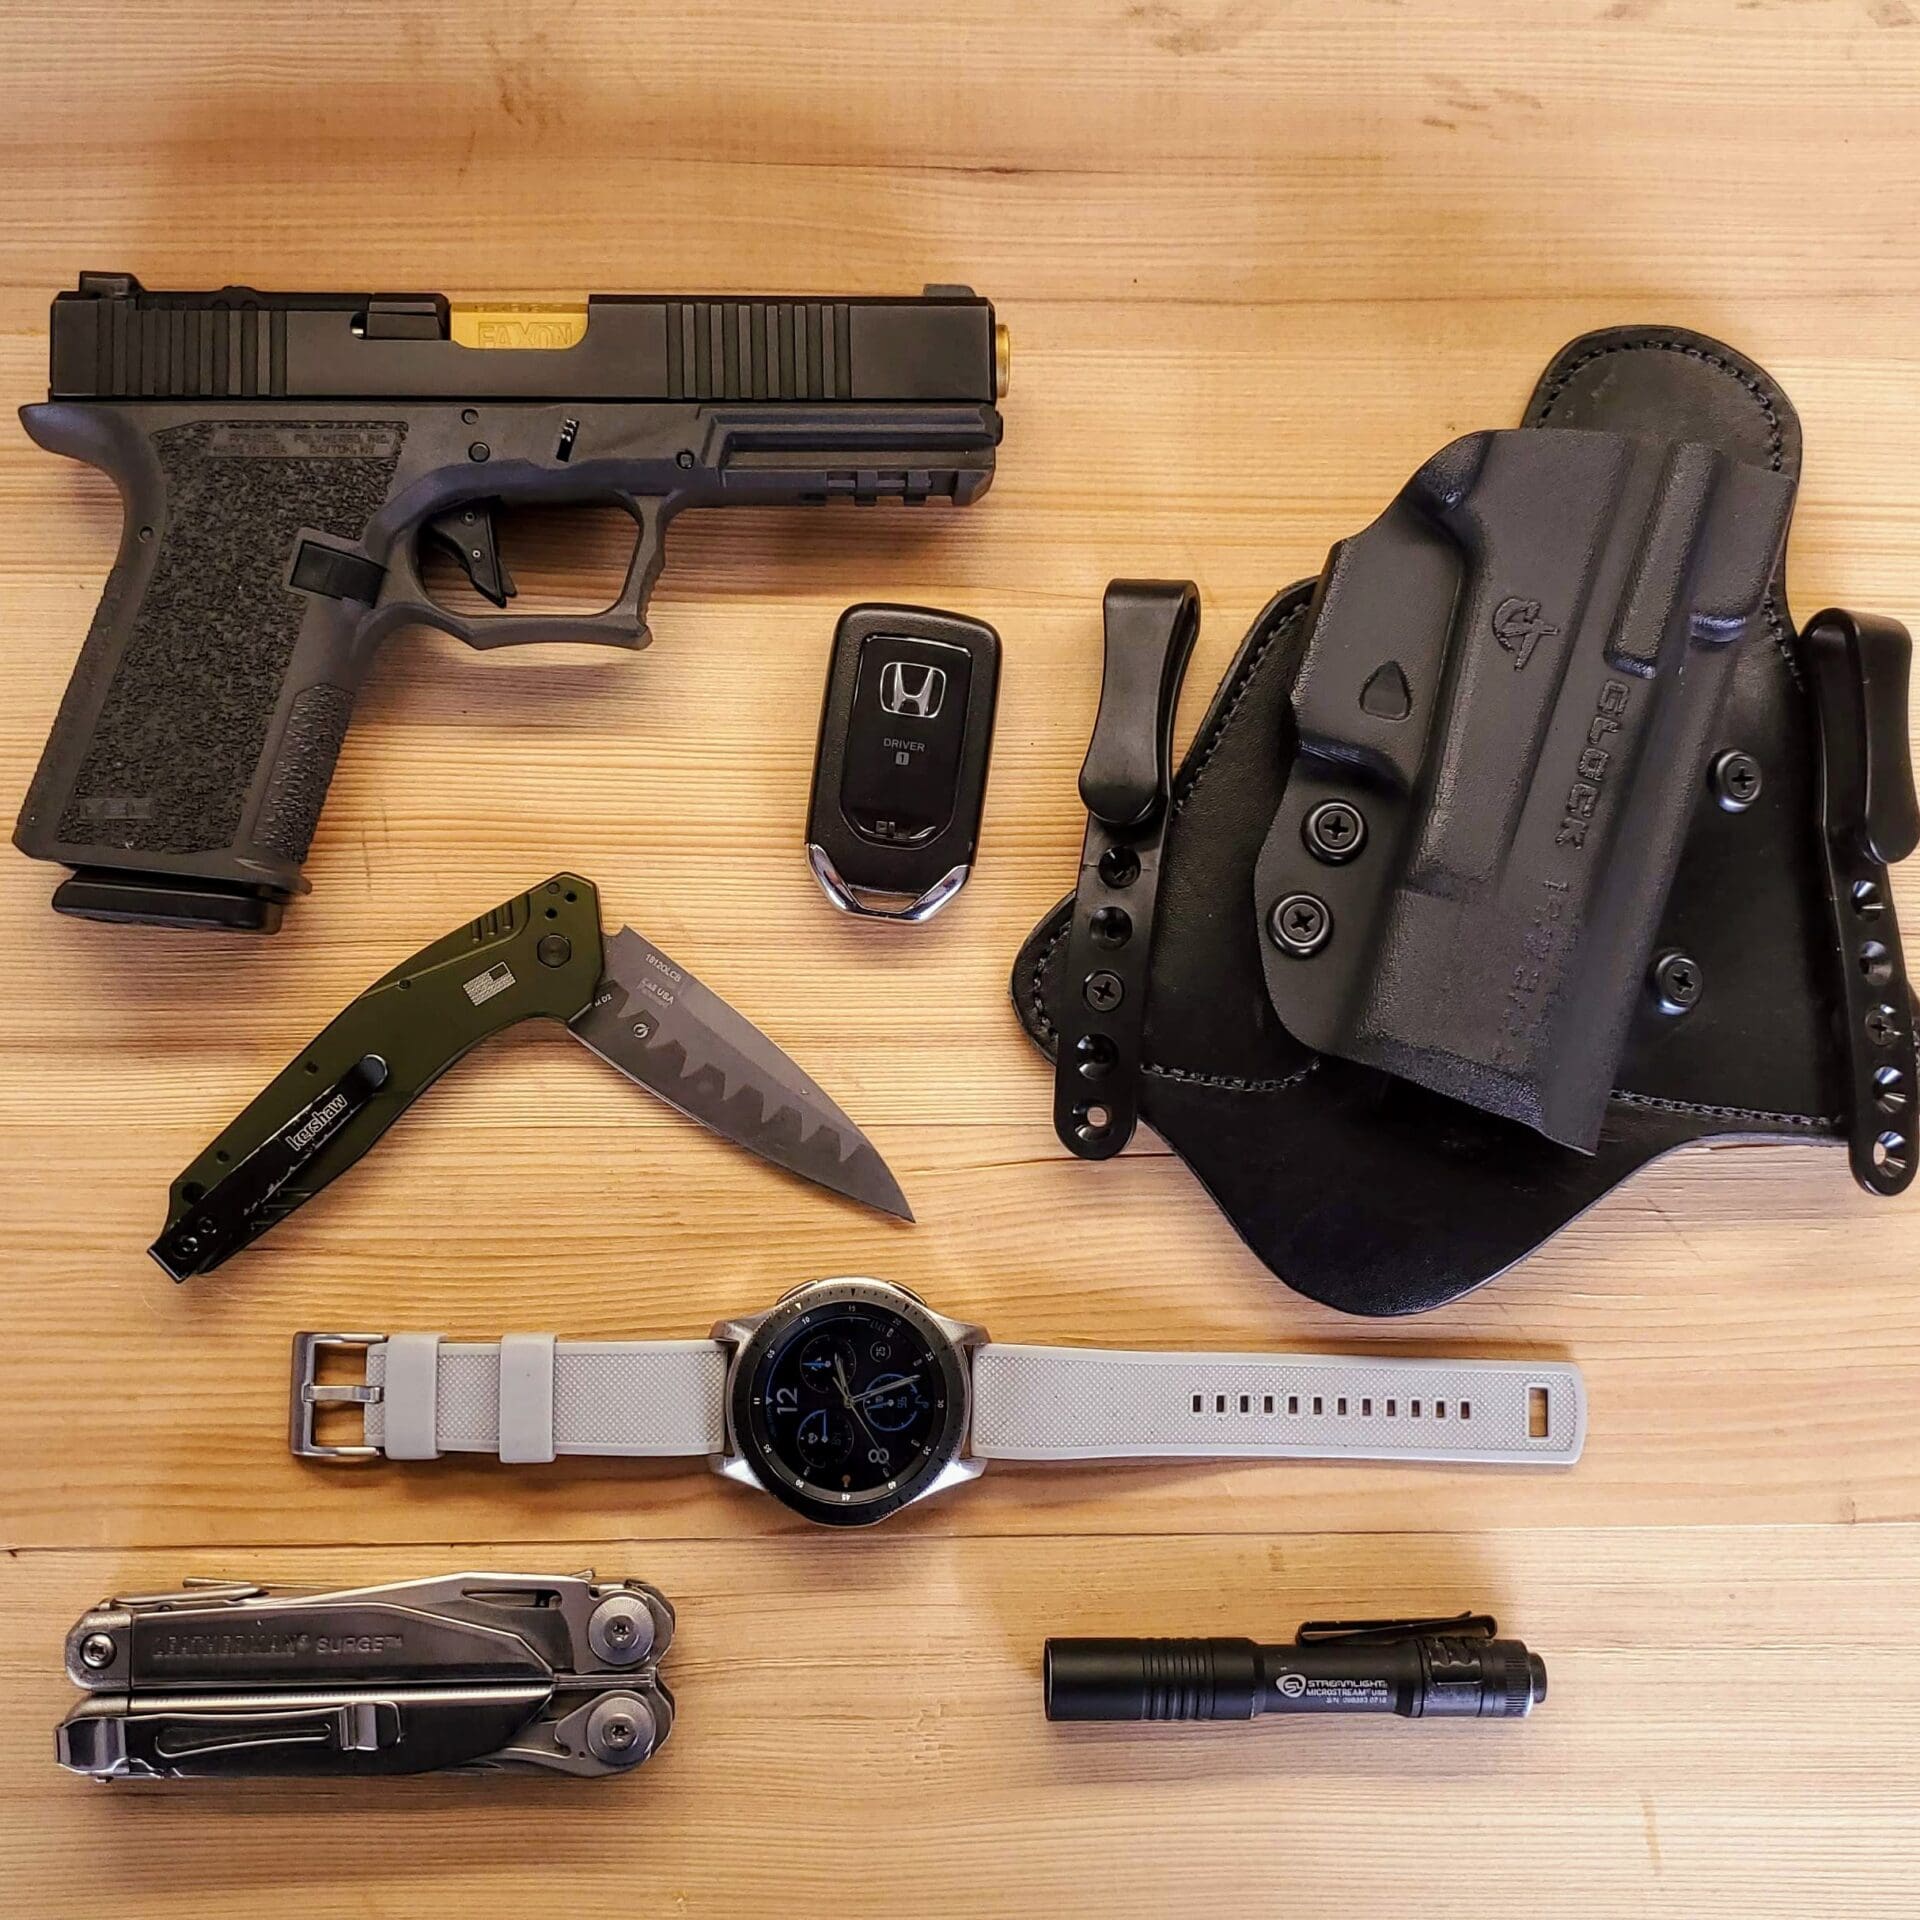 EDC everyday Carry what I'm carrying now